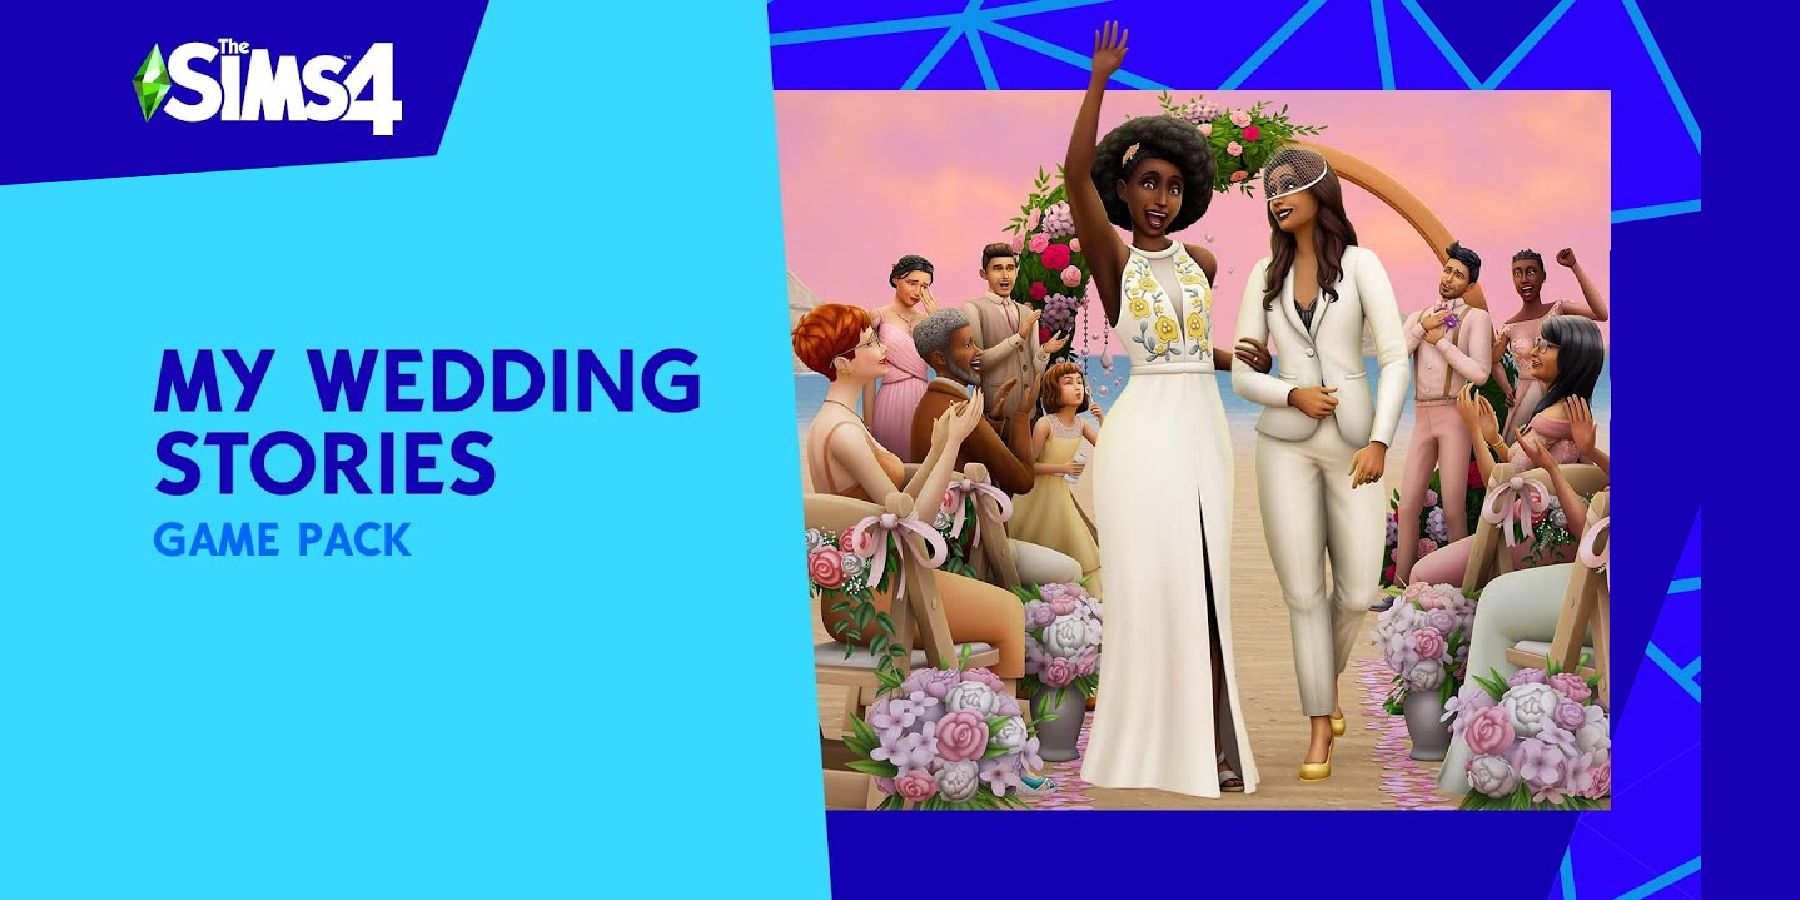 Sims 4 Wedding Expansion Won't Release in Russia Because